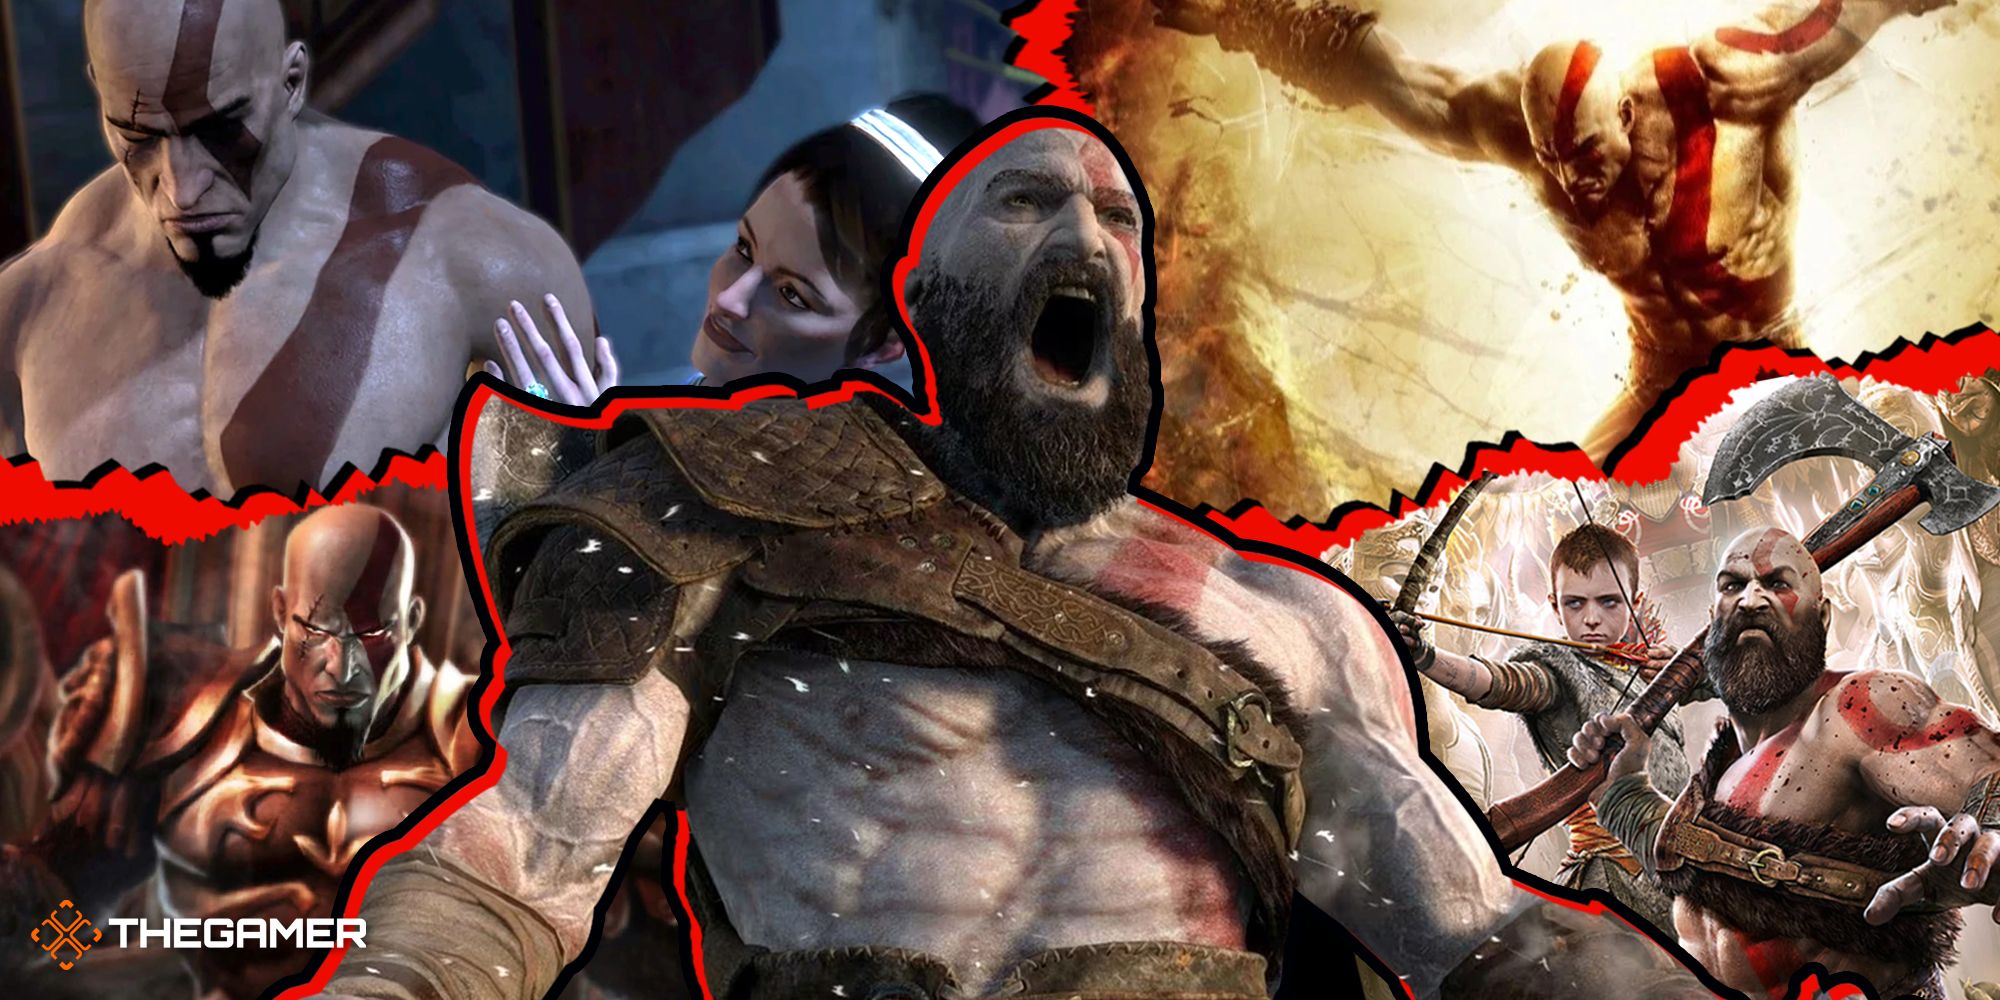 Kratos Character development and growth